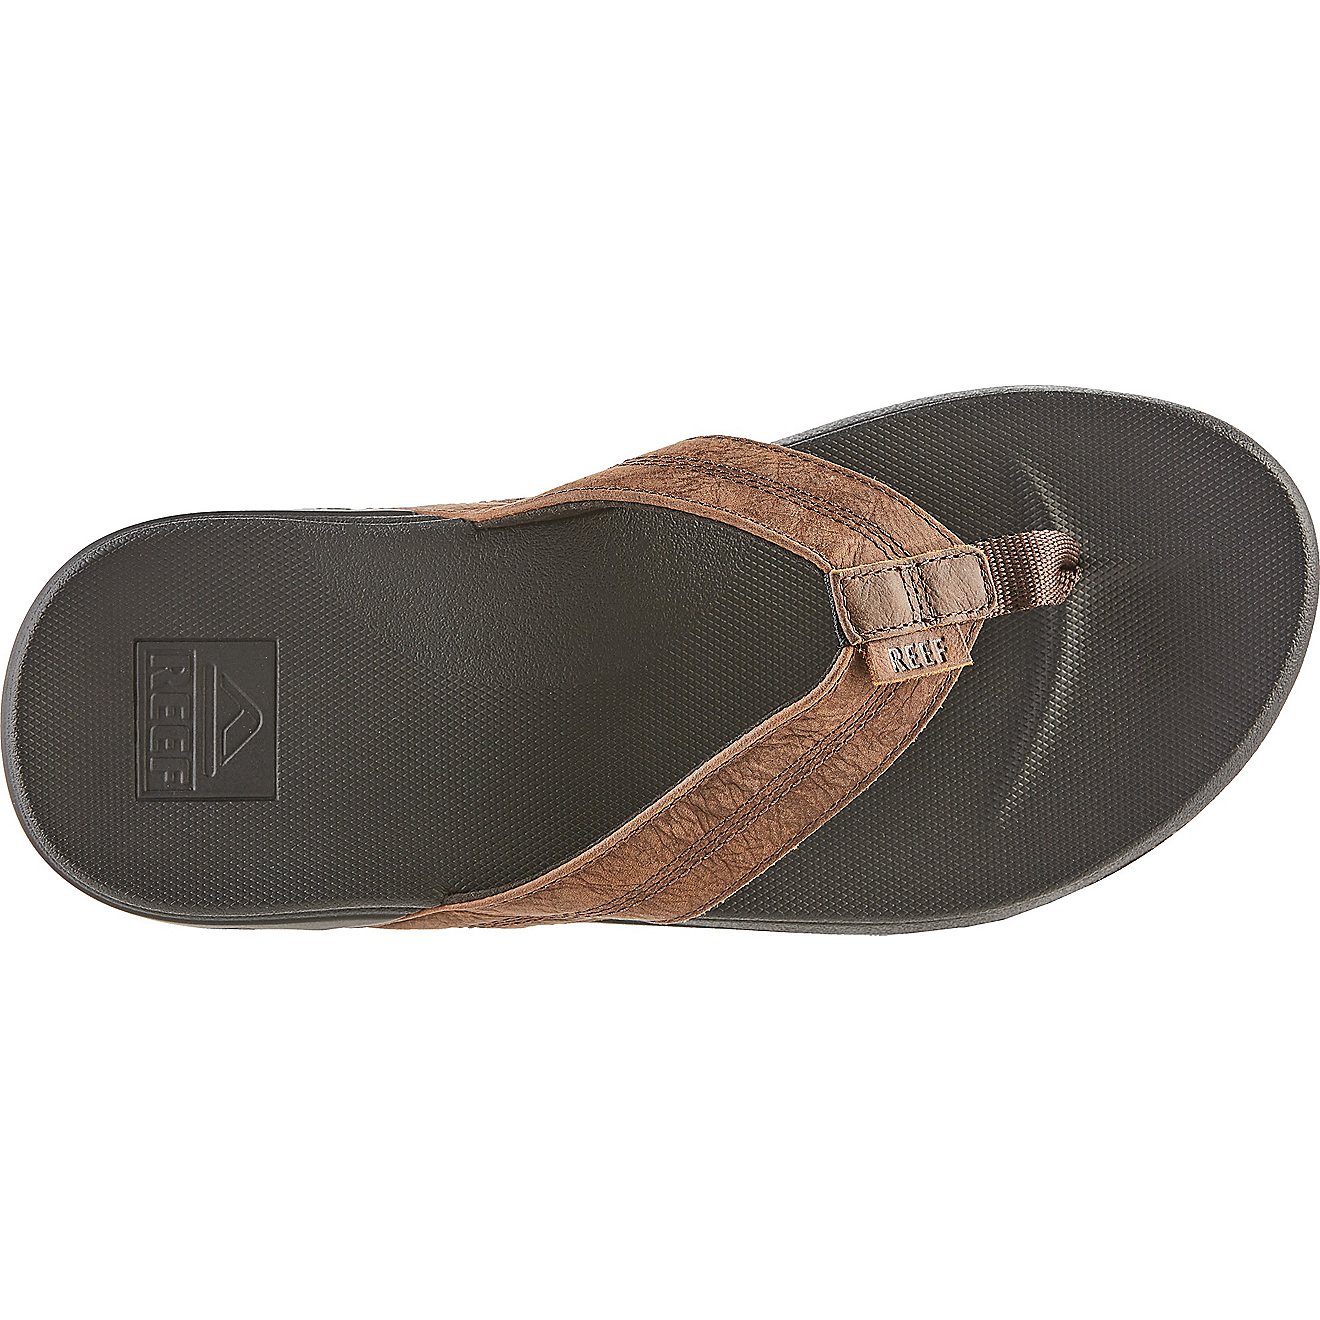 Reef Men's Cushion Phantom LE Sandals | Free Shipping at Academy